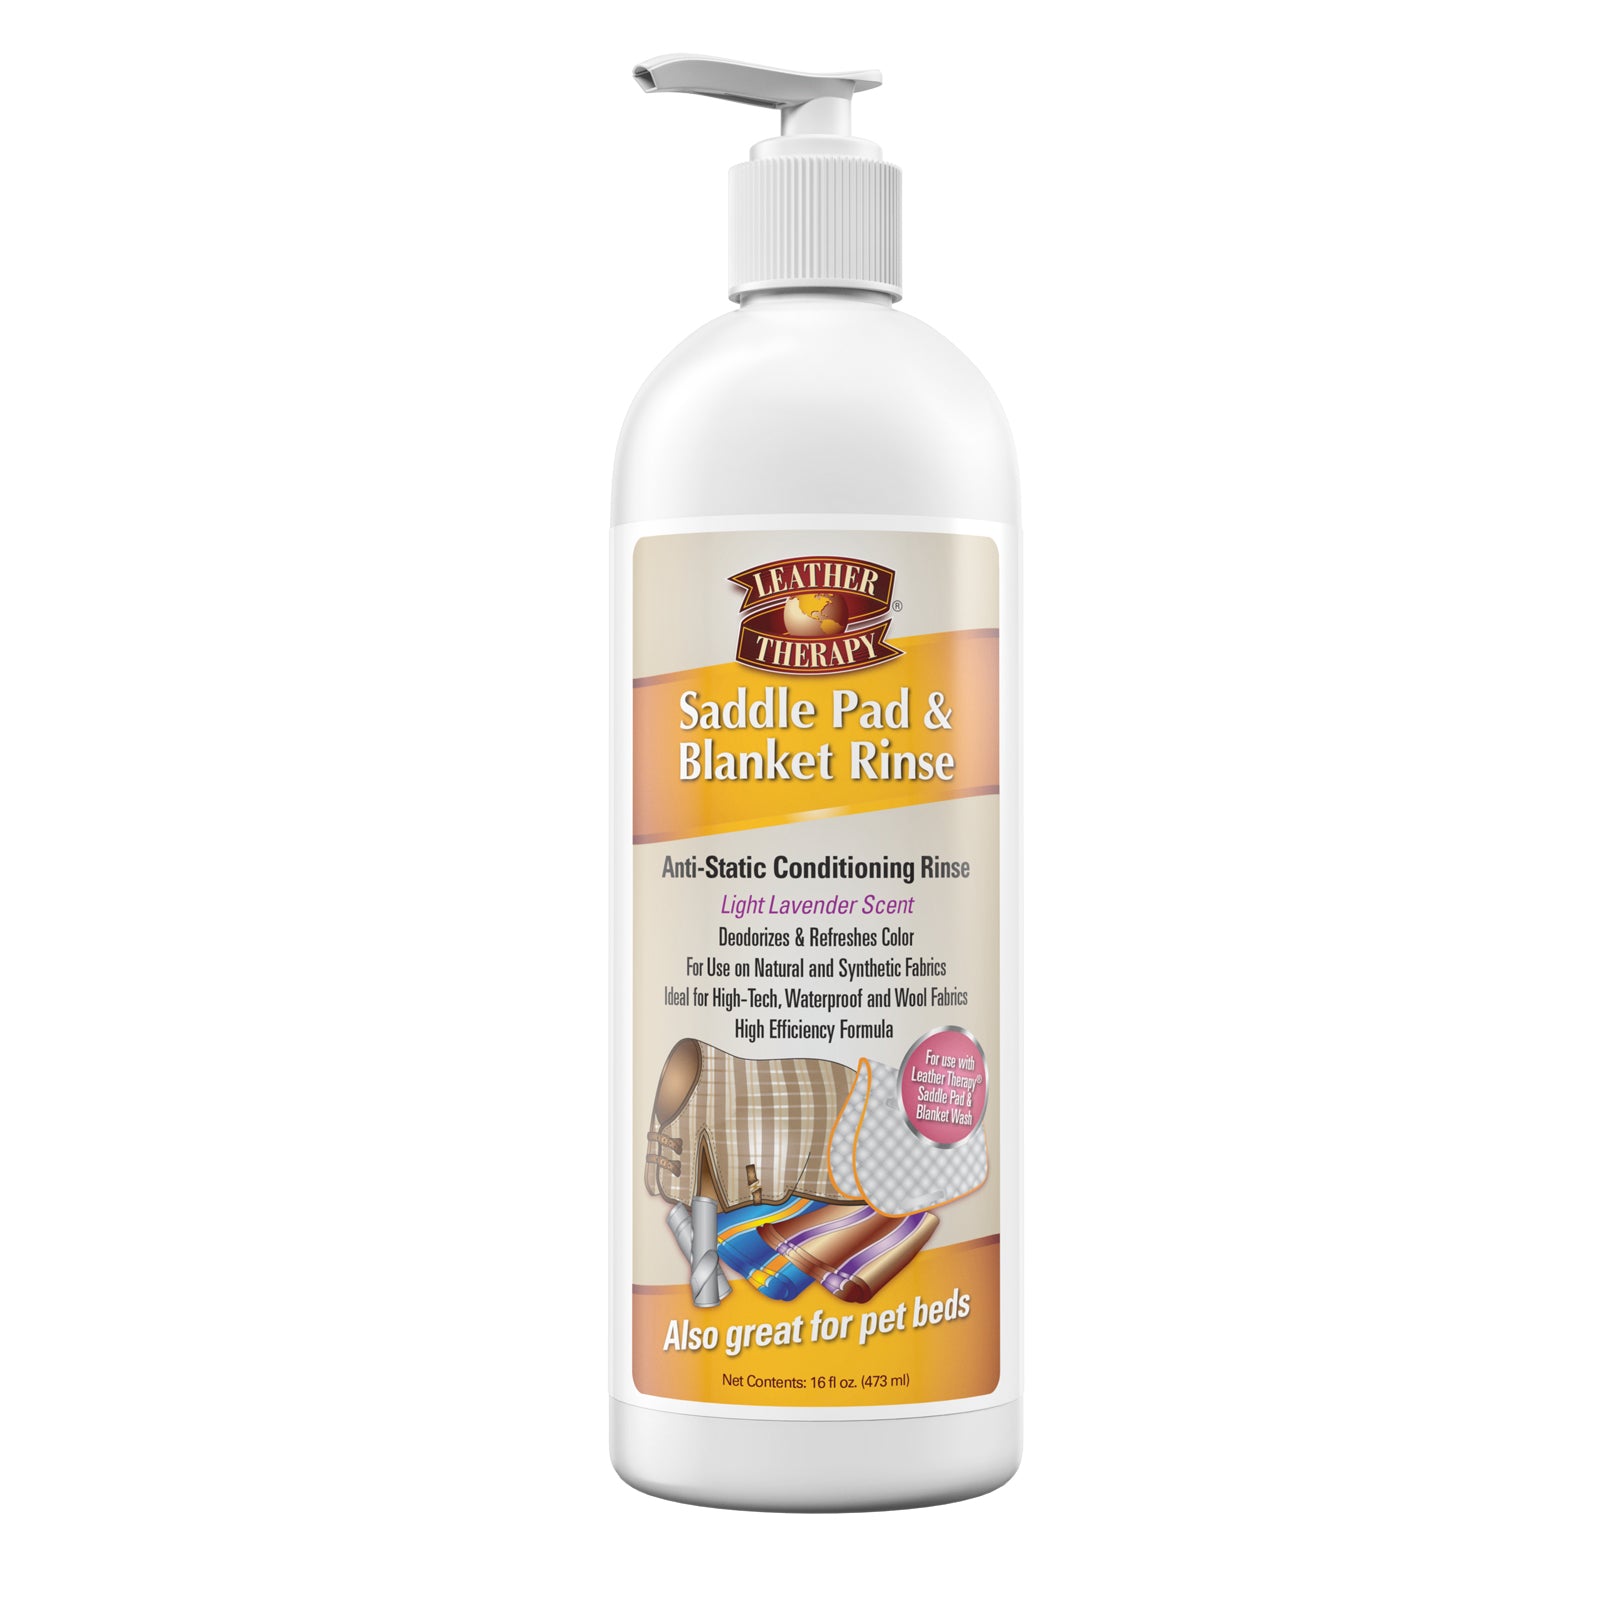 Leather Therapy Saddle Pad & Blanket Rinse.  Anti-static conditioning rinse with a light lavender scent.  16 fluid ounce bottle with pump dispenser.